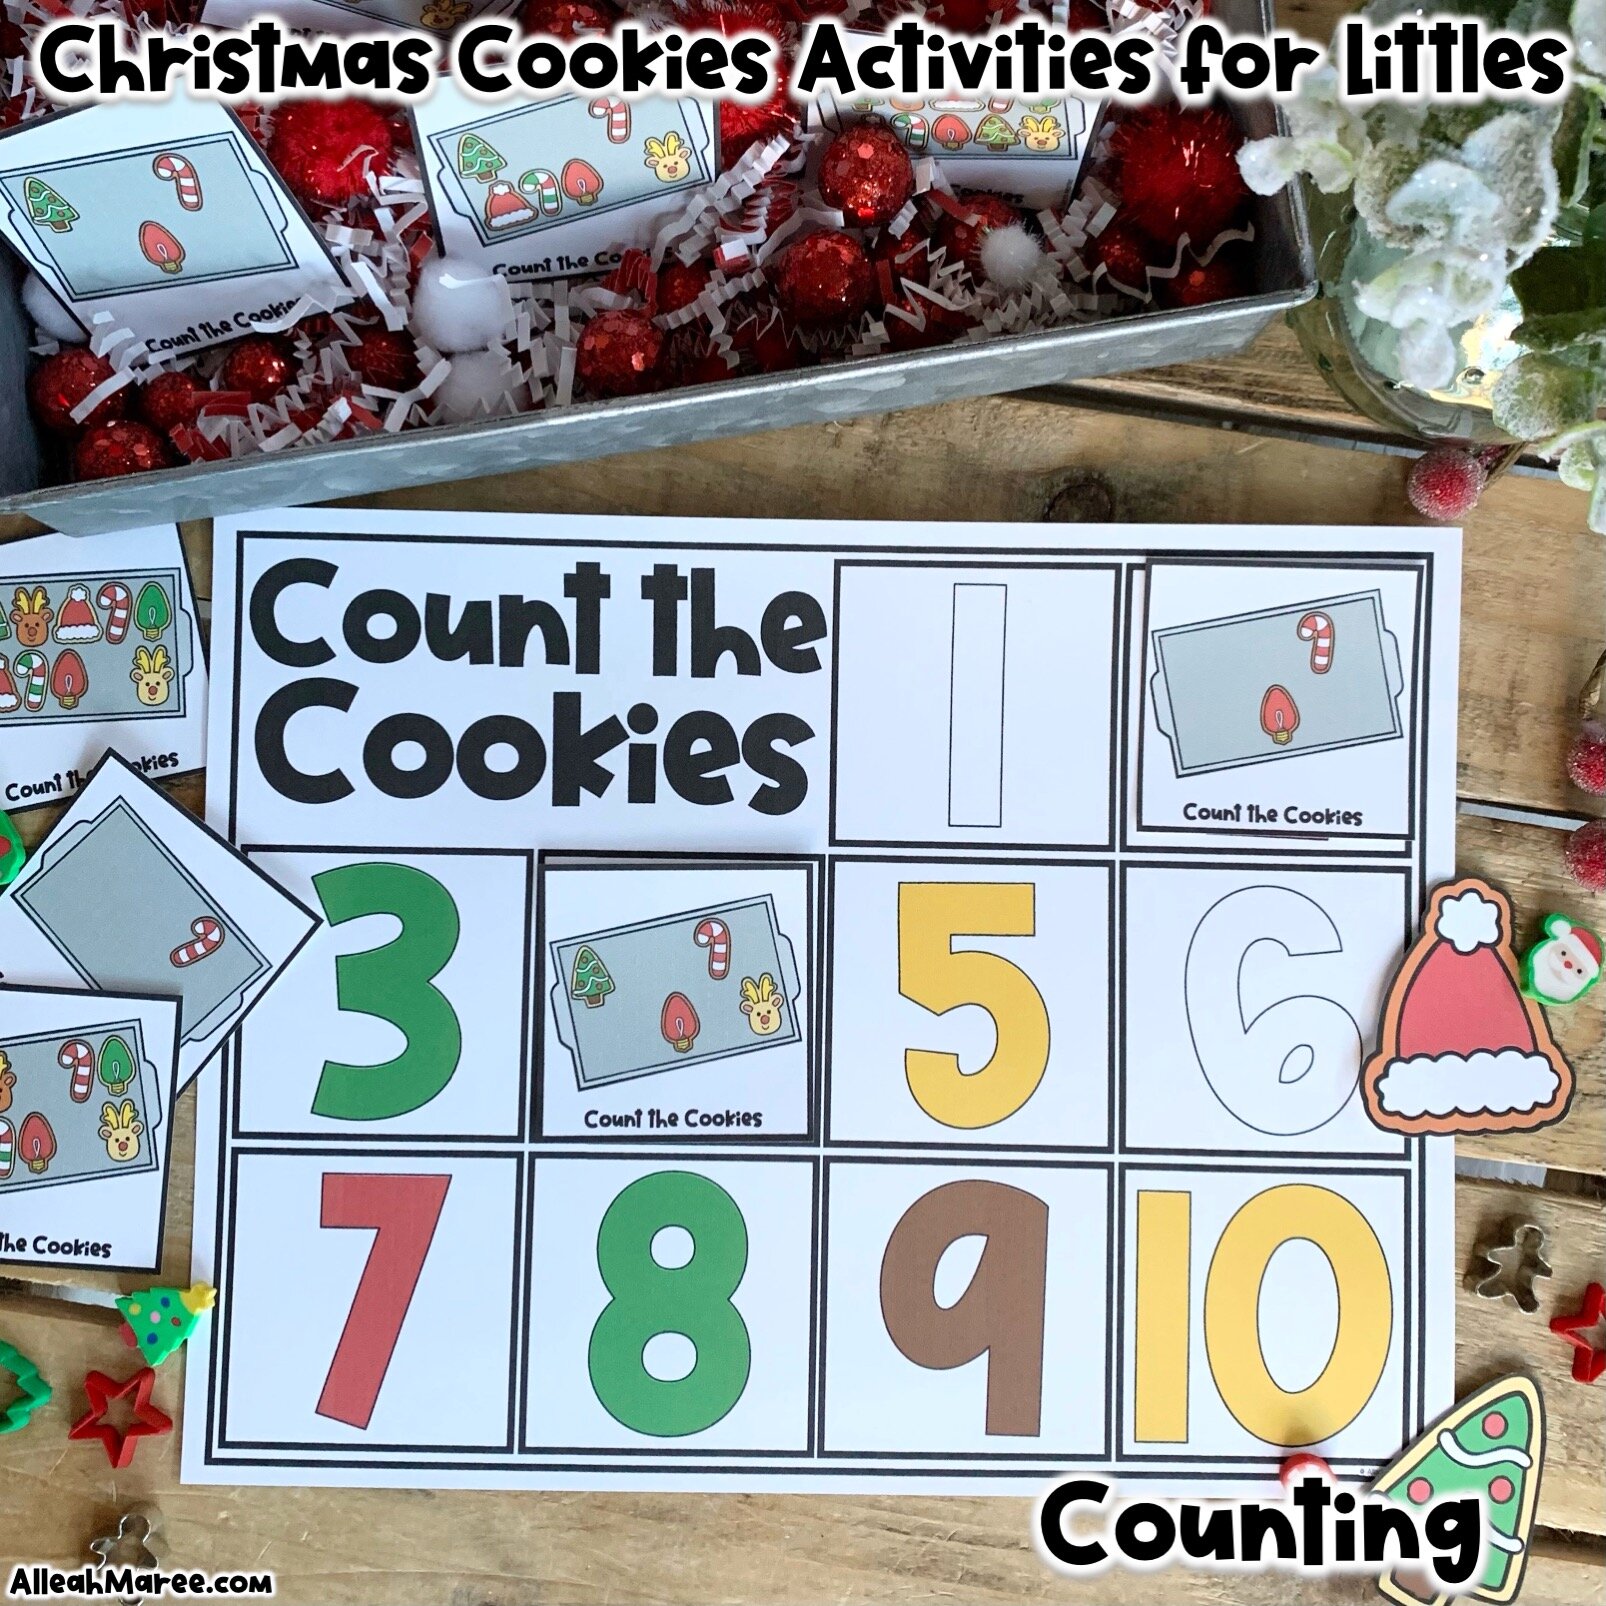 Counting Christmas Cookies